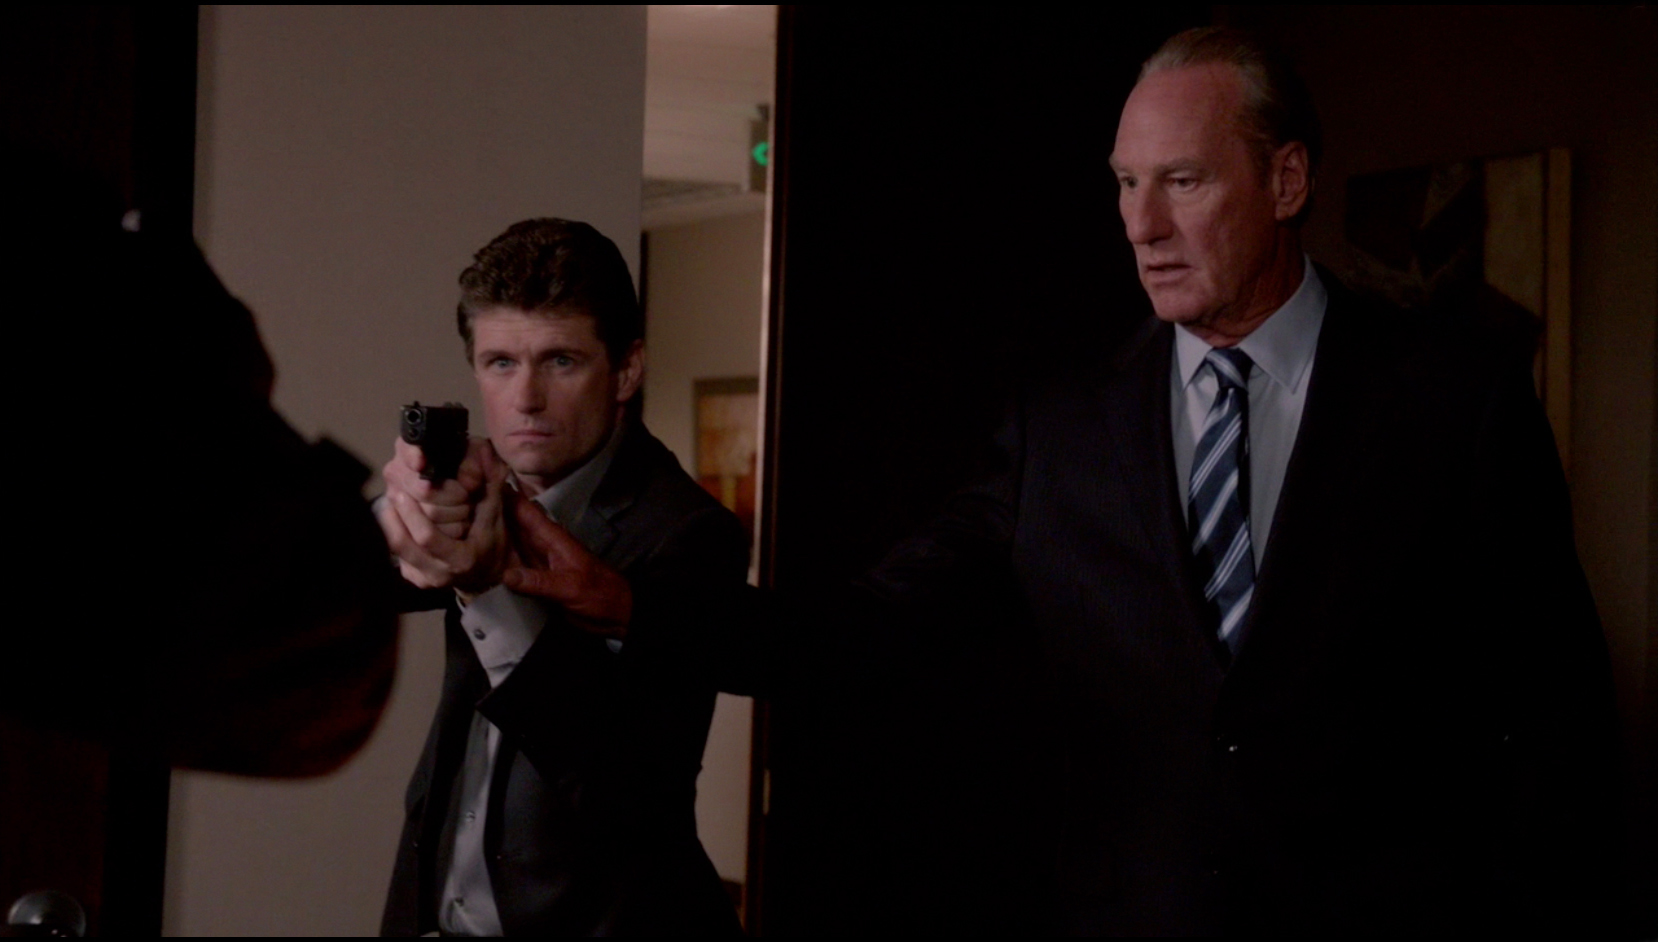 David James Sikkink with Alex O'Loughlin and Craig T. Nelson in Hawaii Five-0